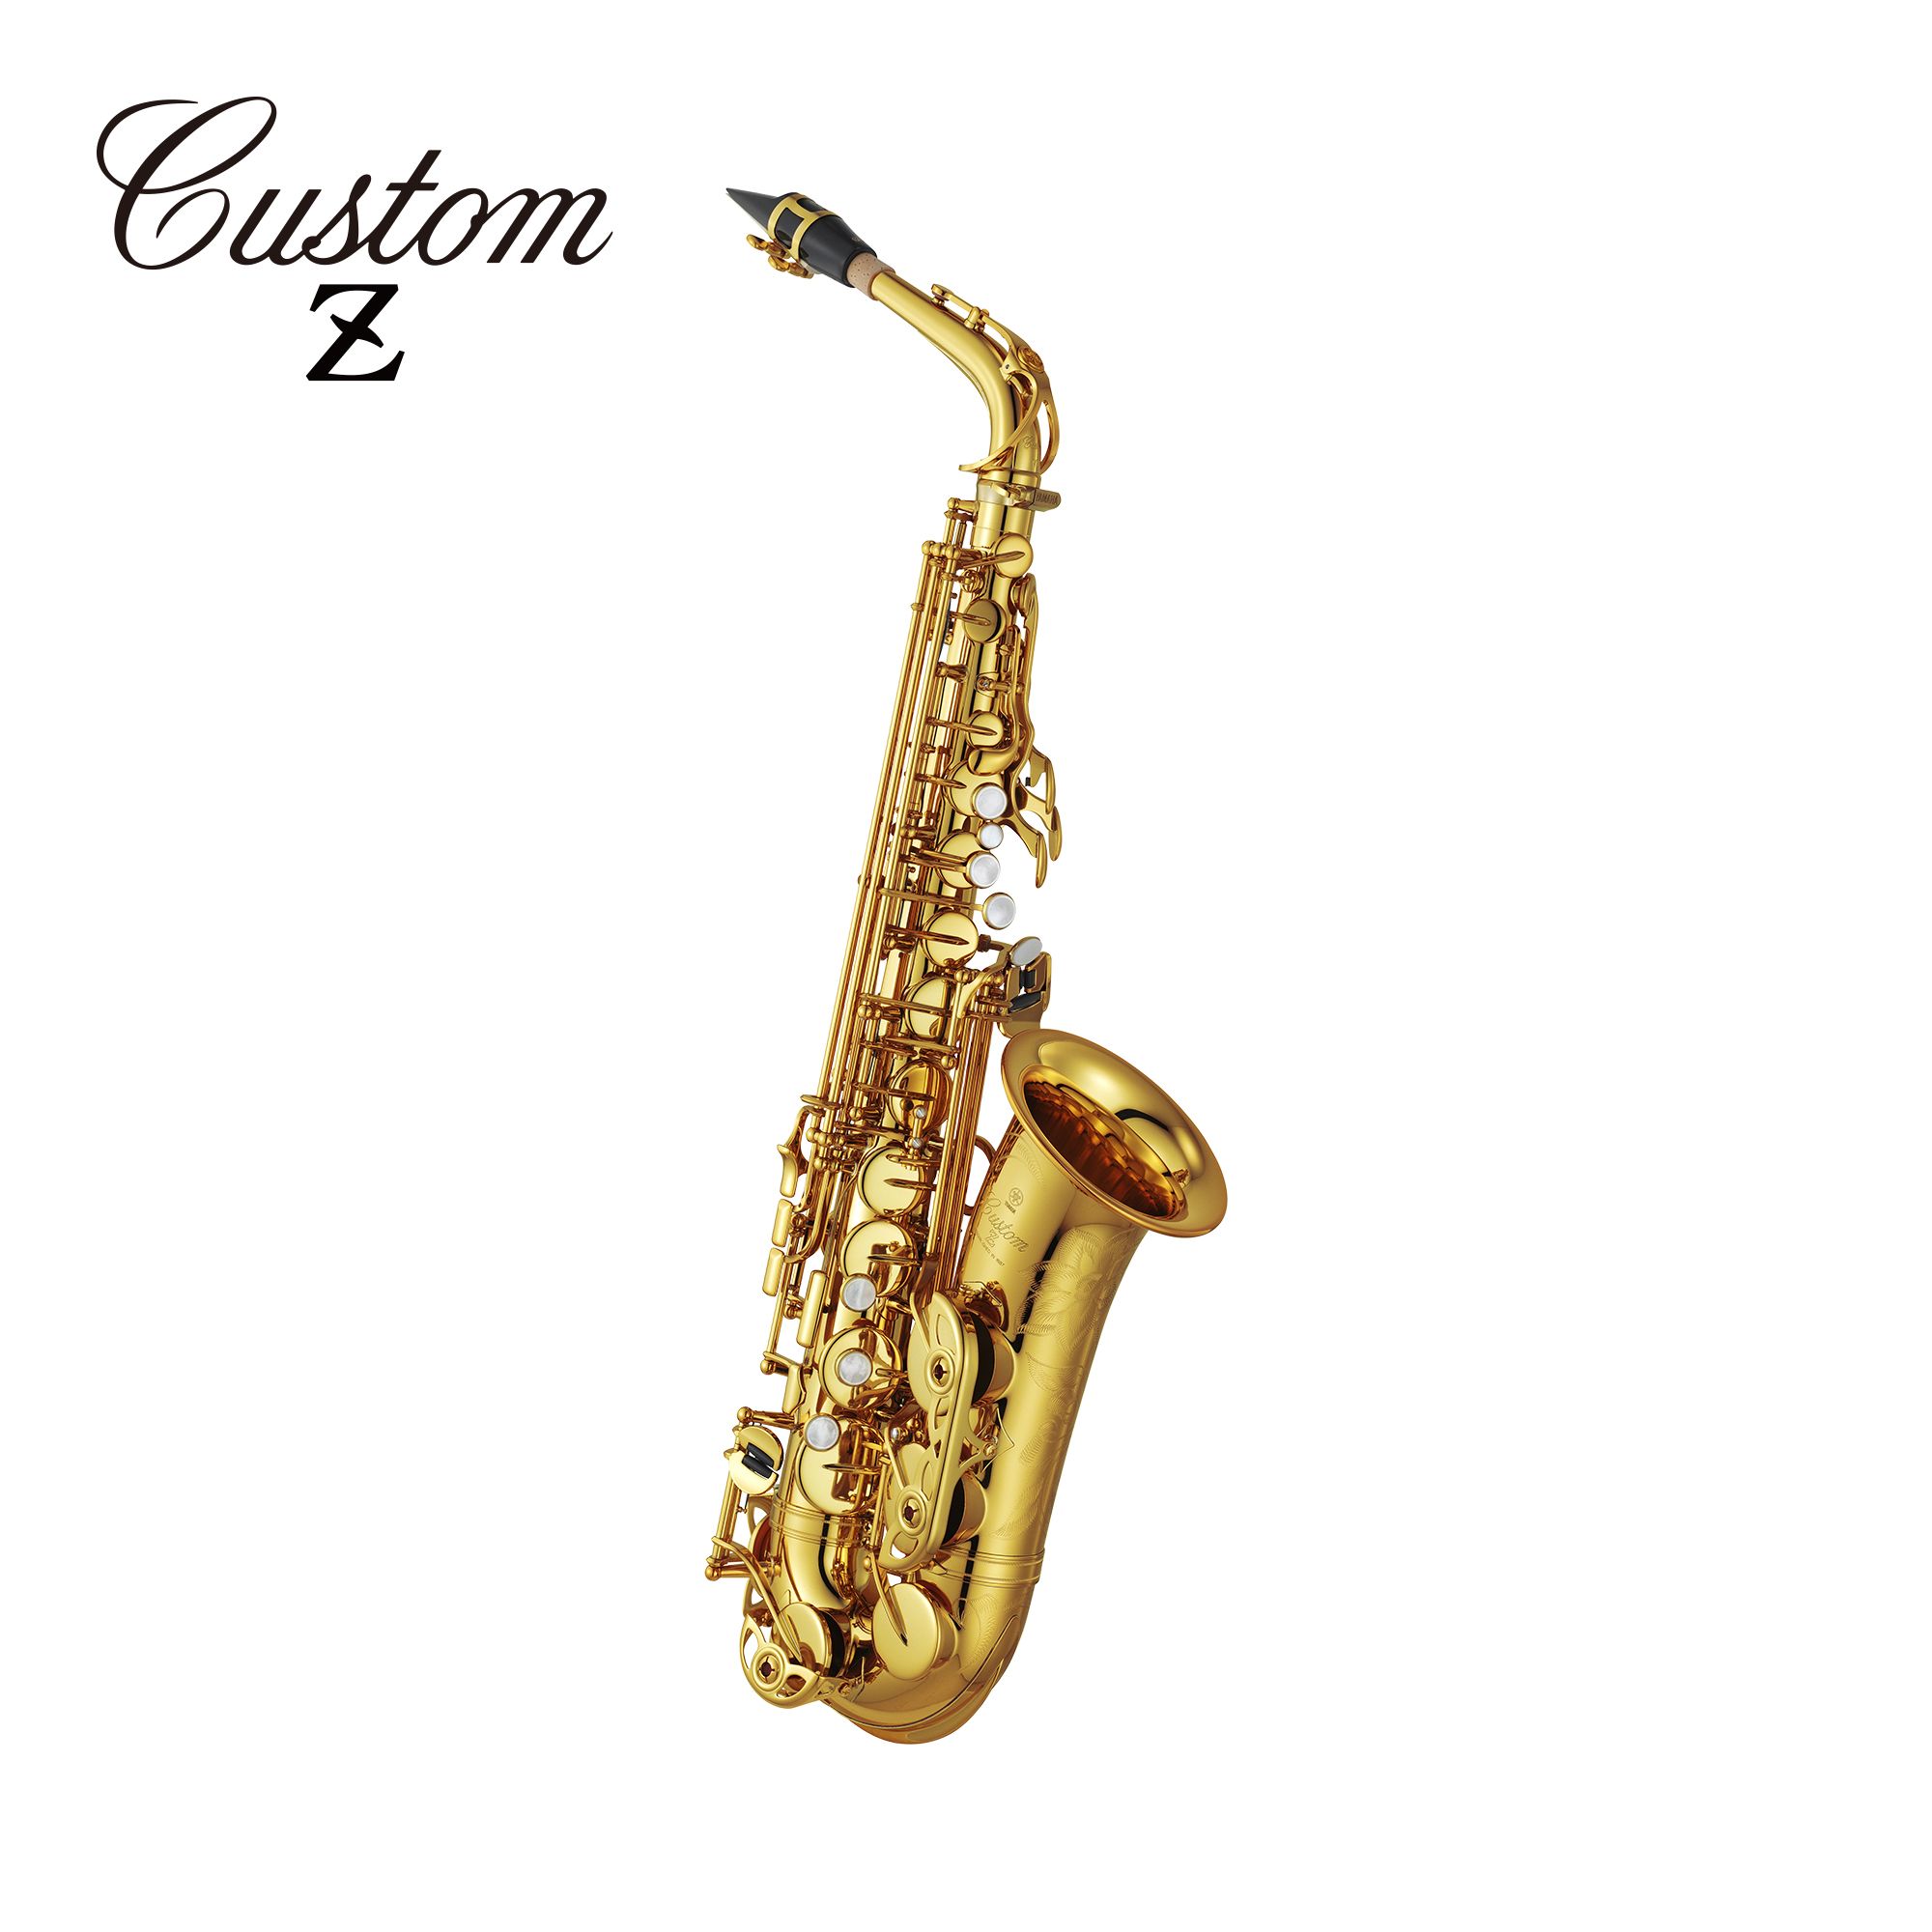 YAS-82Z - Overview - Saxophones - Brass & Woodwinds - Musical Instruments -  Products - Yamaha - Canada - English